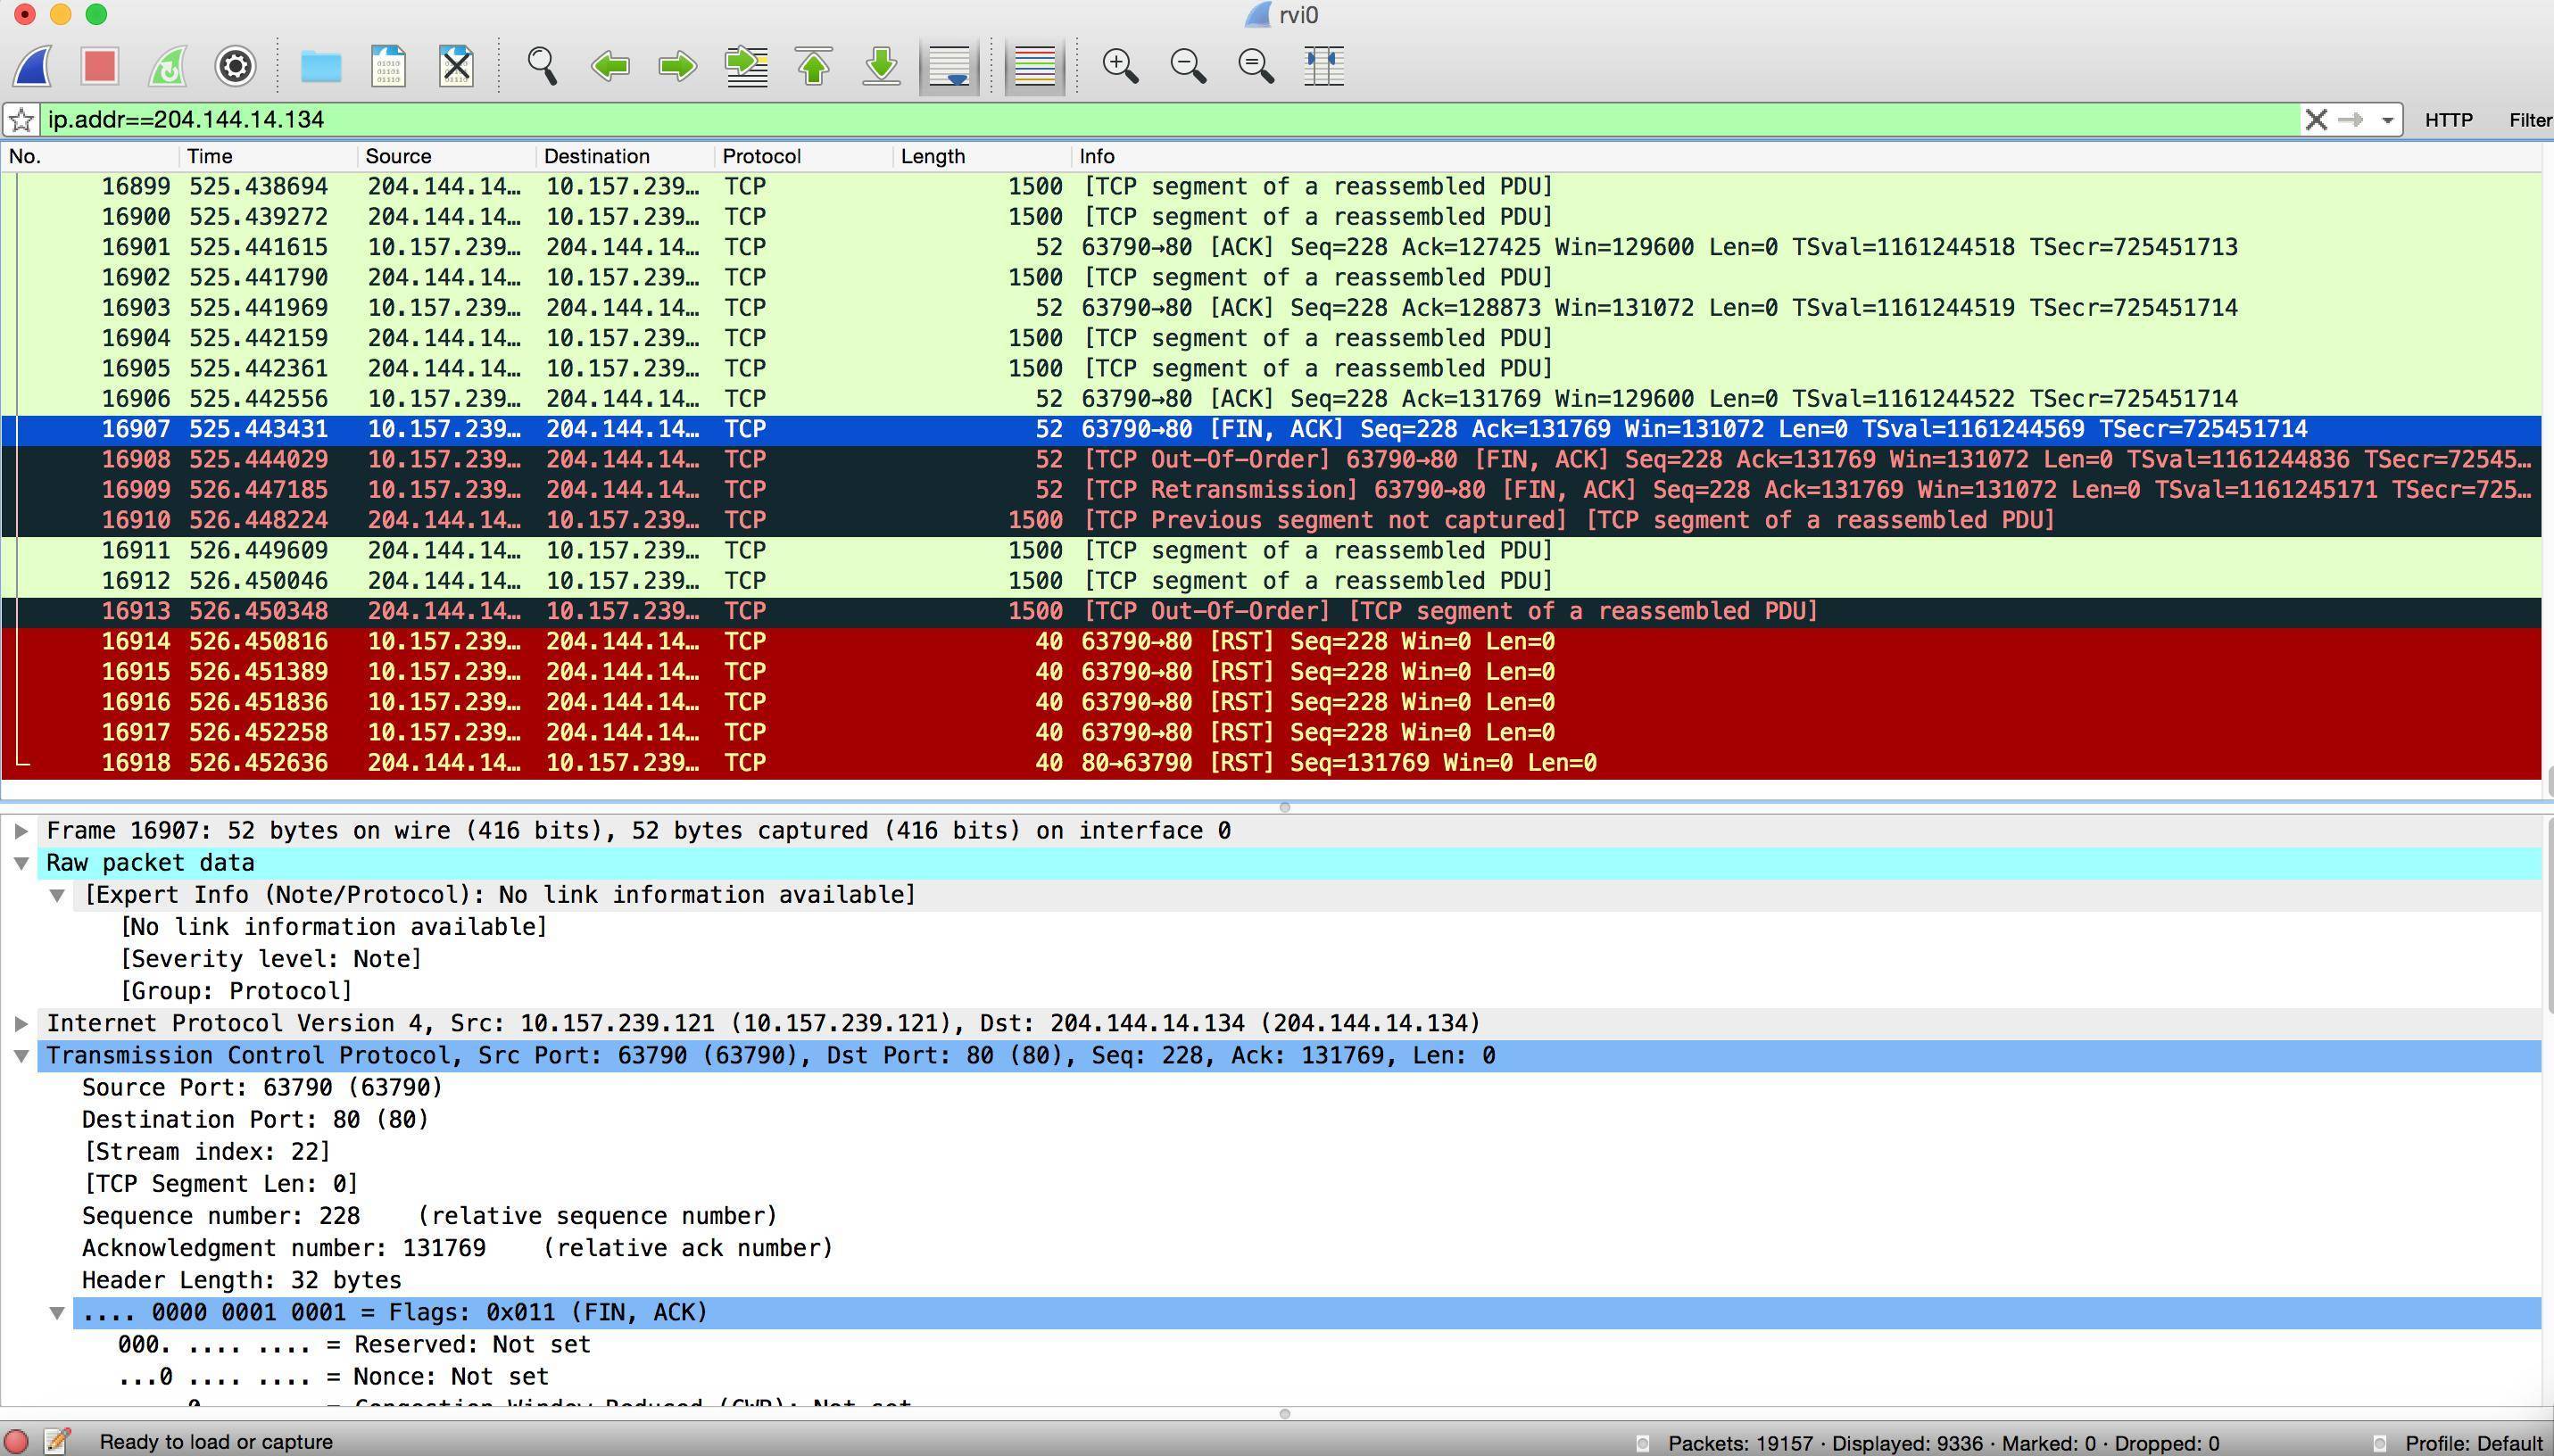 Wireshark TCP traffic for pdf download from 204.144.14.134